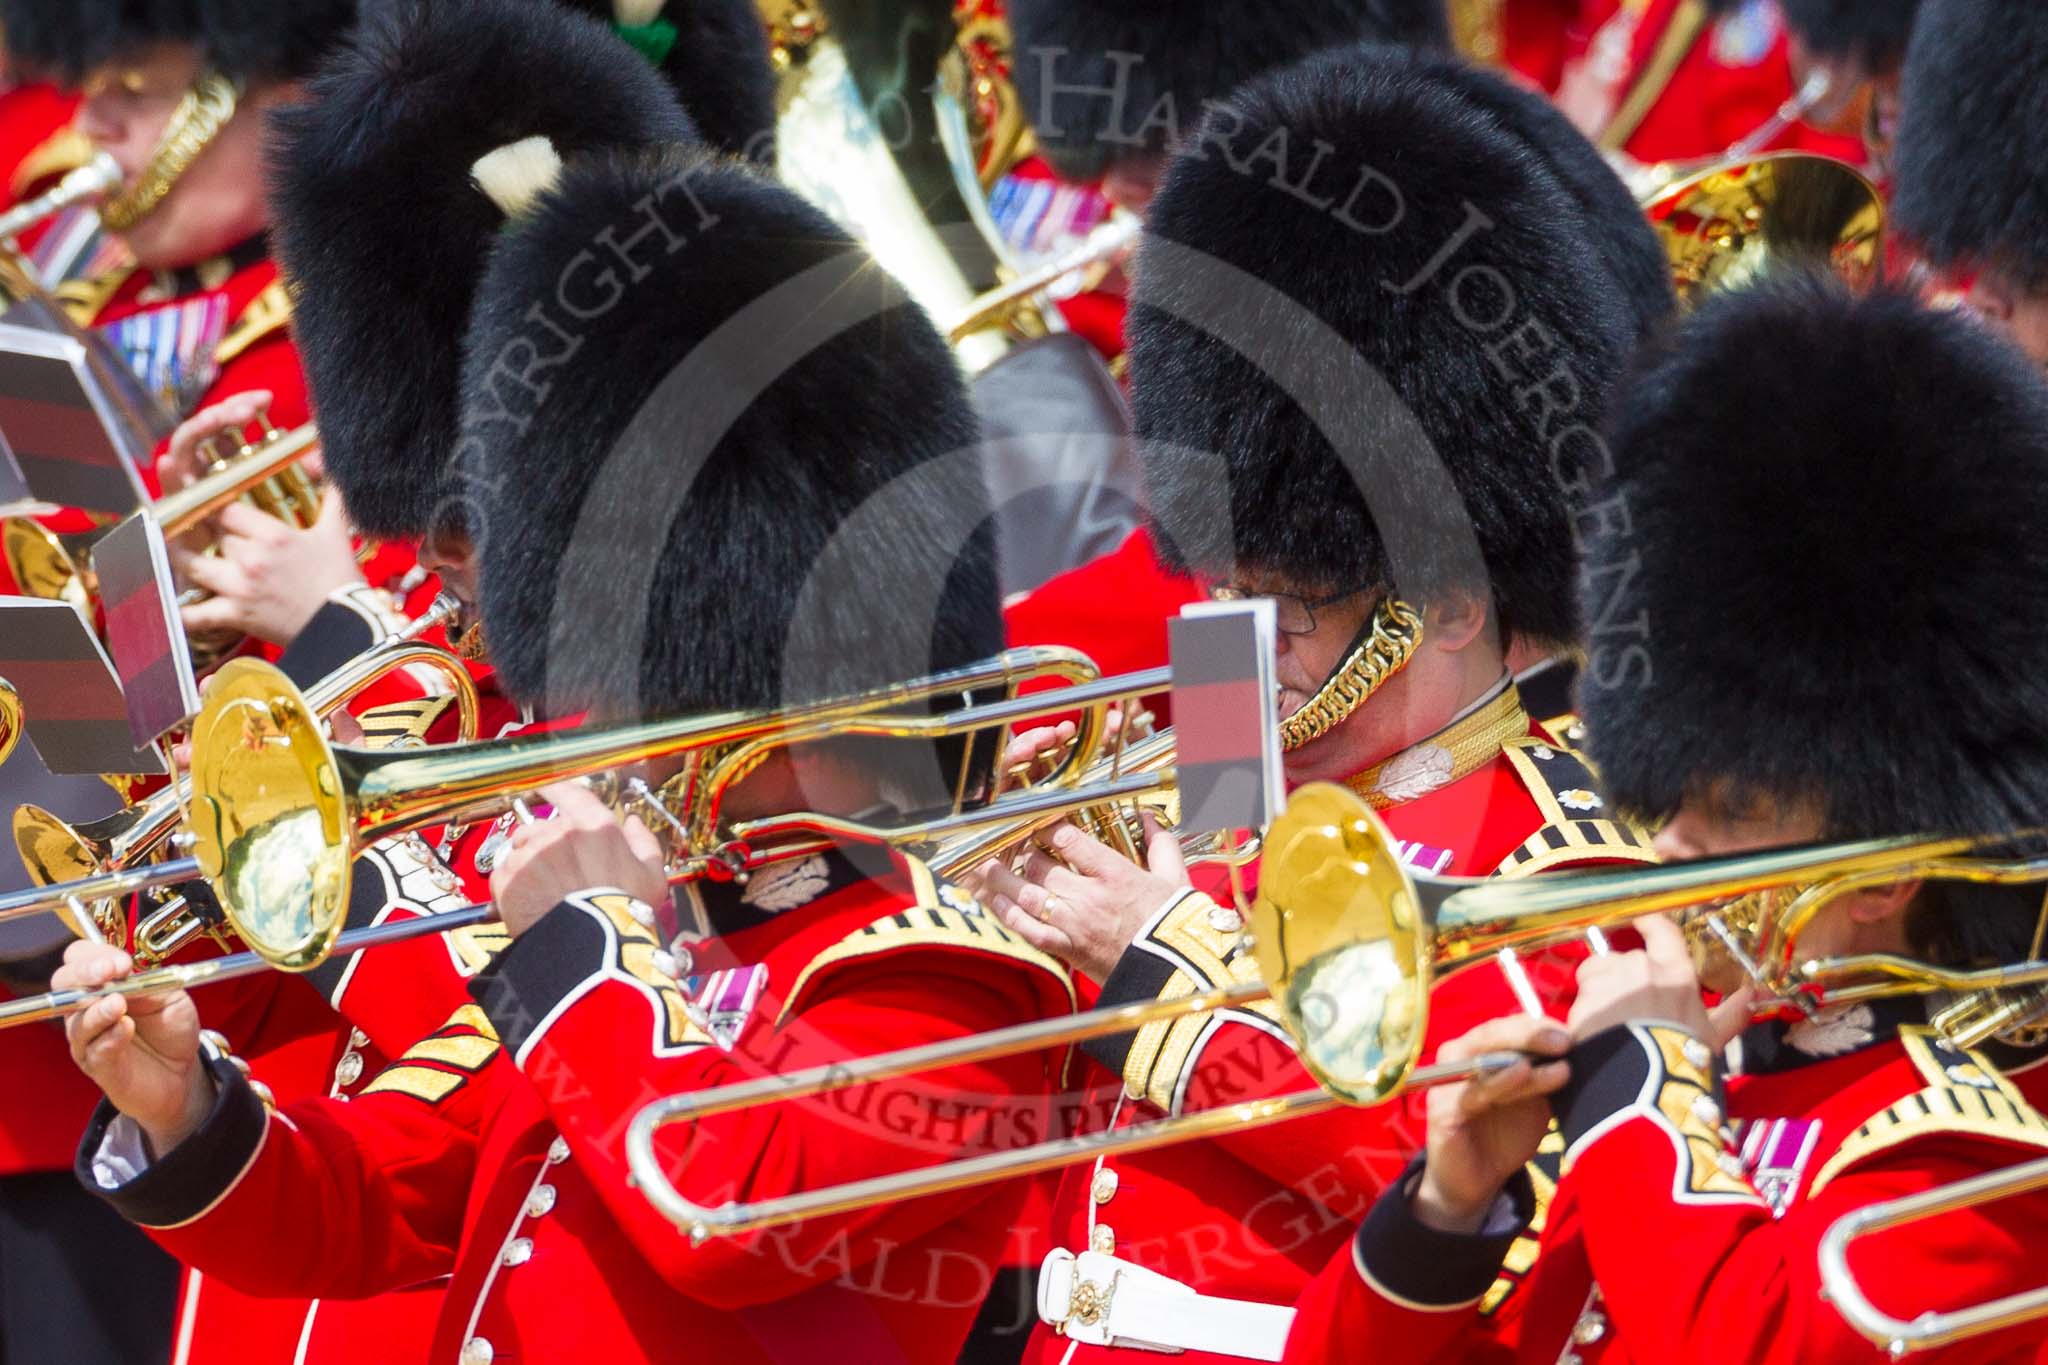 The Colonel's Review 2015.
Horse Guards Parade, Westminster,
London,

United Kingdom,
on 06 June 2015 at 11:10, image #270